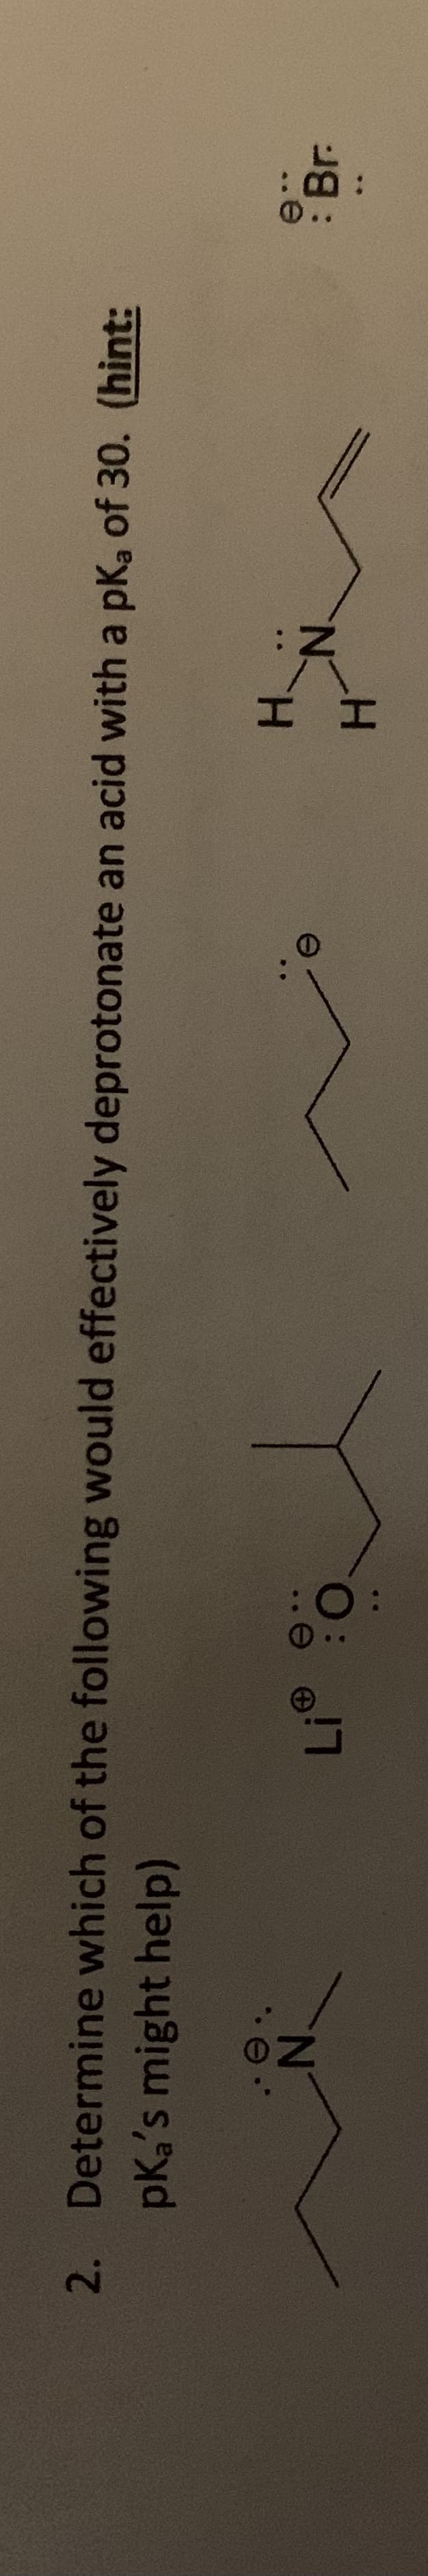 0..
HH
2. Determine which of the following would effectively deprotonate an acid with a pKa of 30. (hint:
pK,'s might help)
N.
